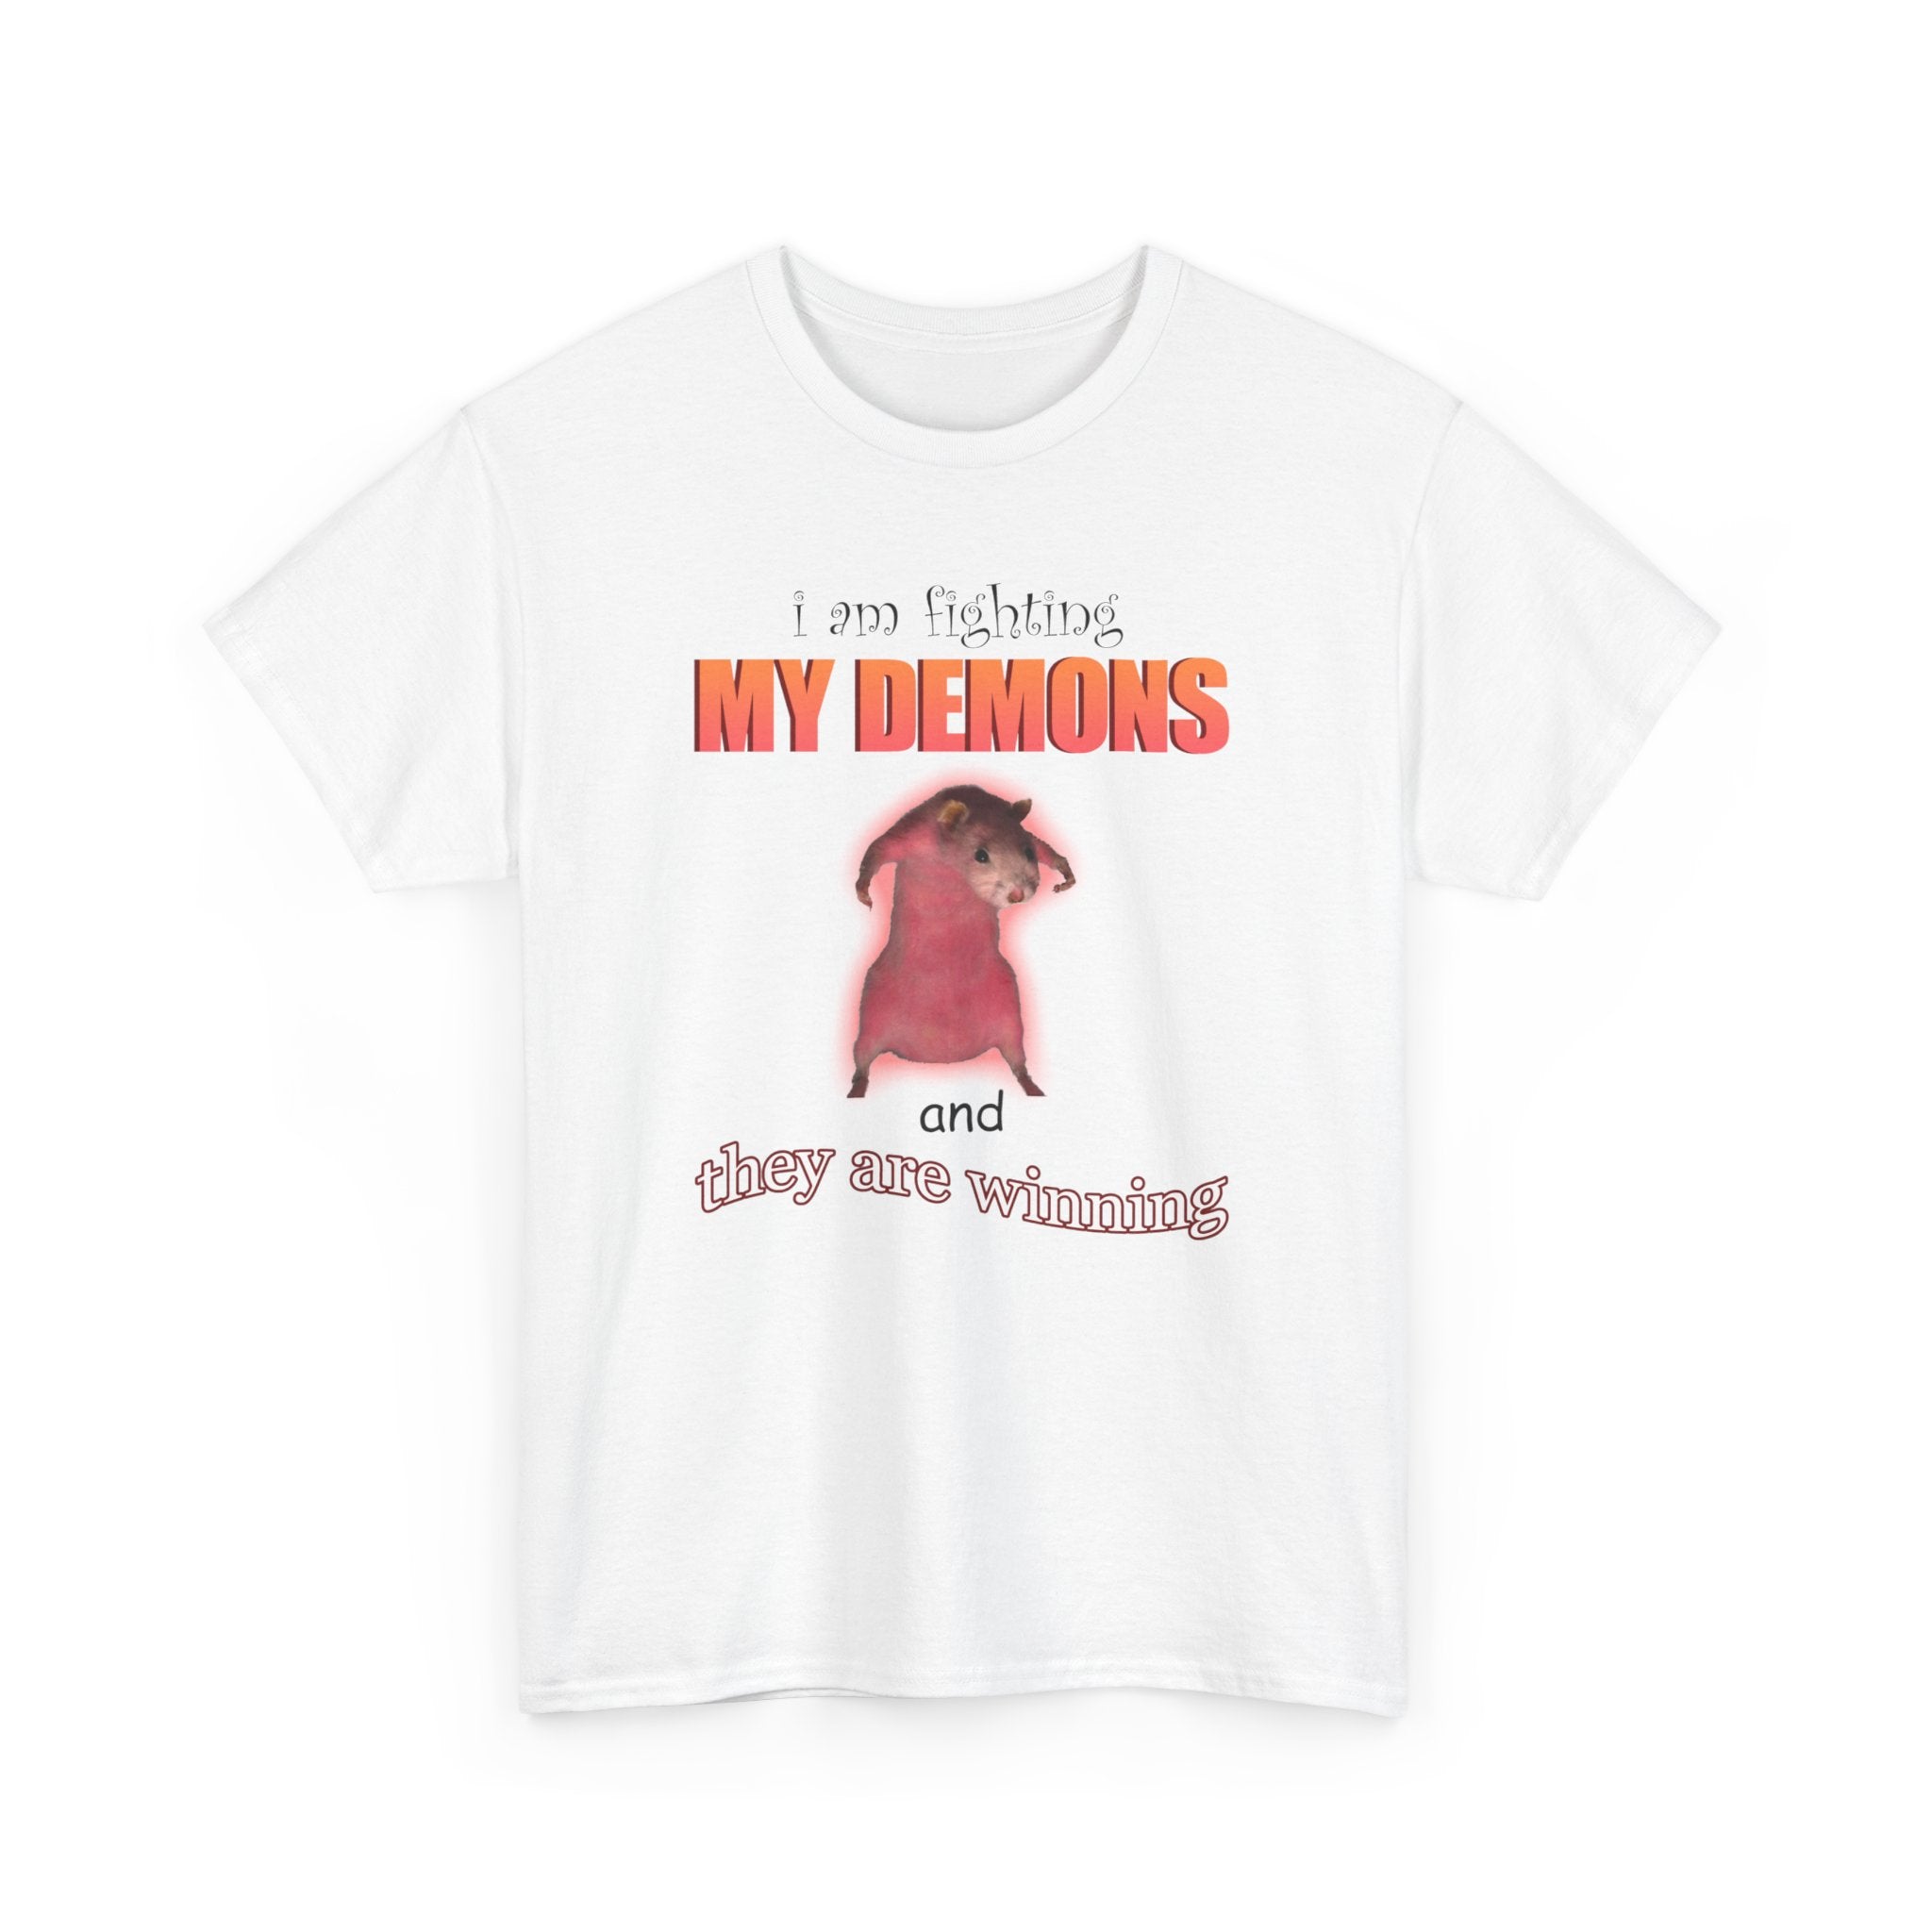 I AM FIGHTING MY DEMONS AND THEY ARE WINNING T-SHIRT